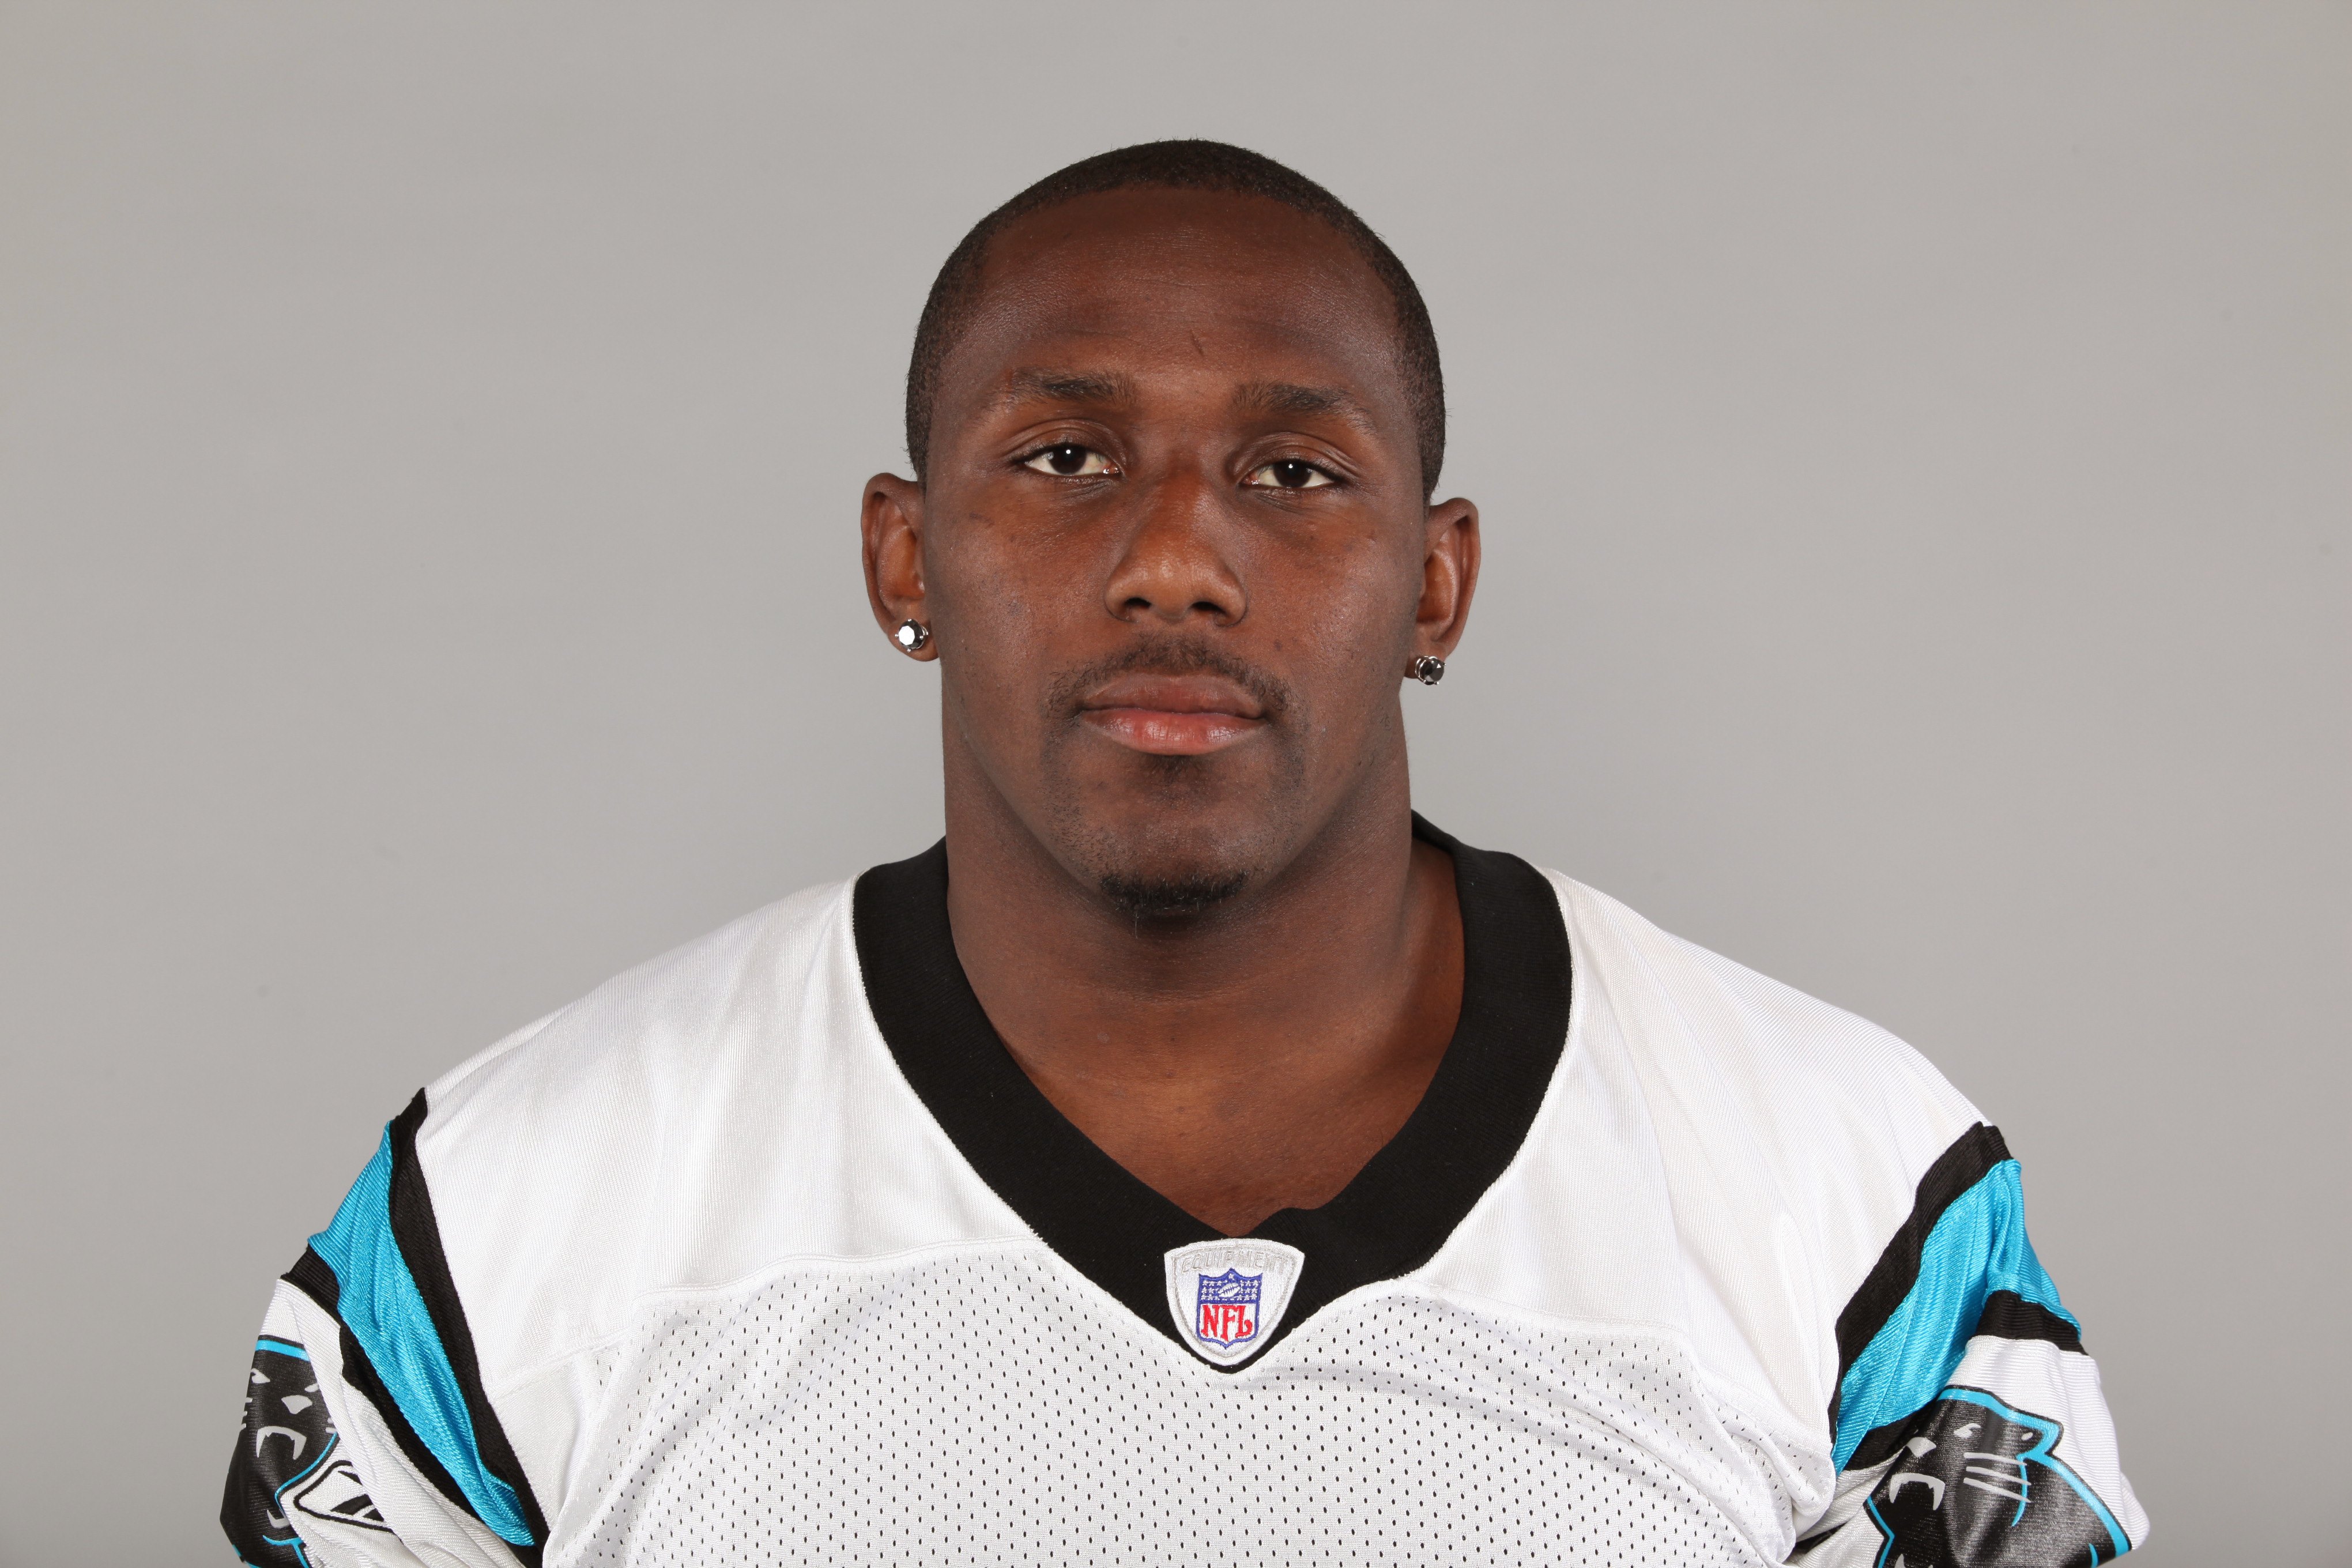 CHARLOTTE, NC - 2009:  Thomas Davis of the Carolina Panthers poses for his 2009 NFL headshot at photo day in Charlotte, North Carolina. (Photo by NFL Photos)